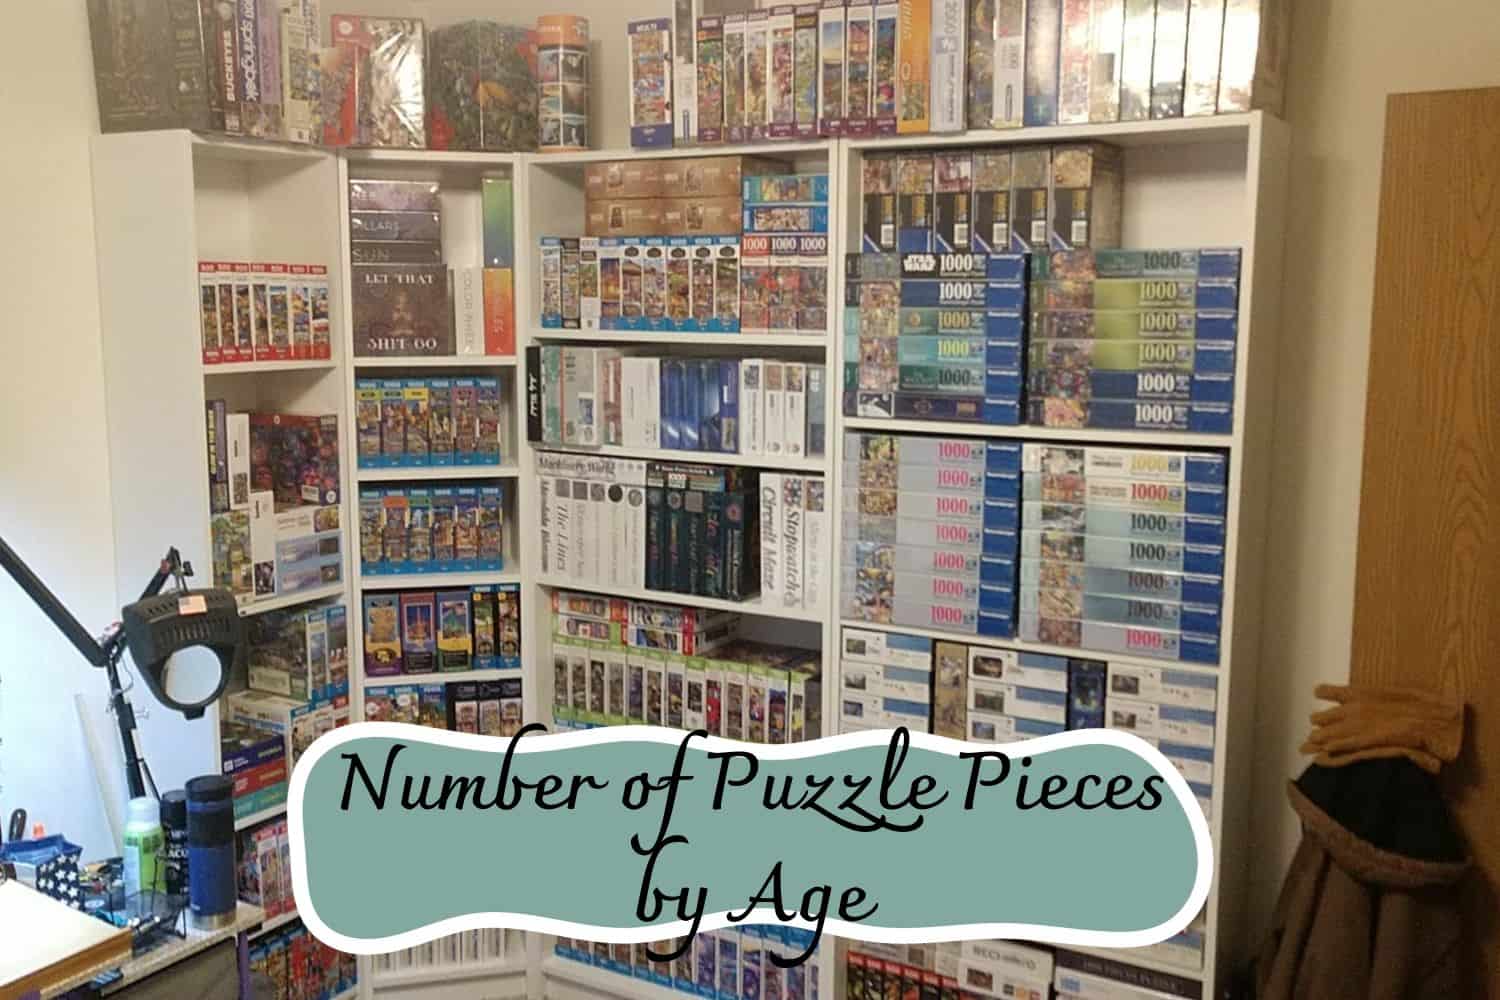 Number of Puzzle Pieces by Age